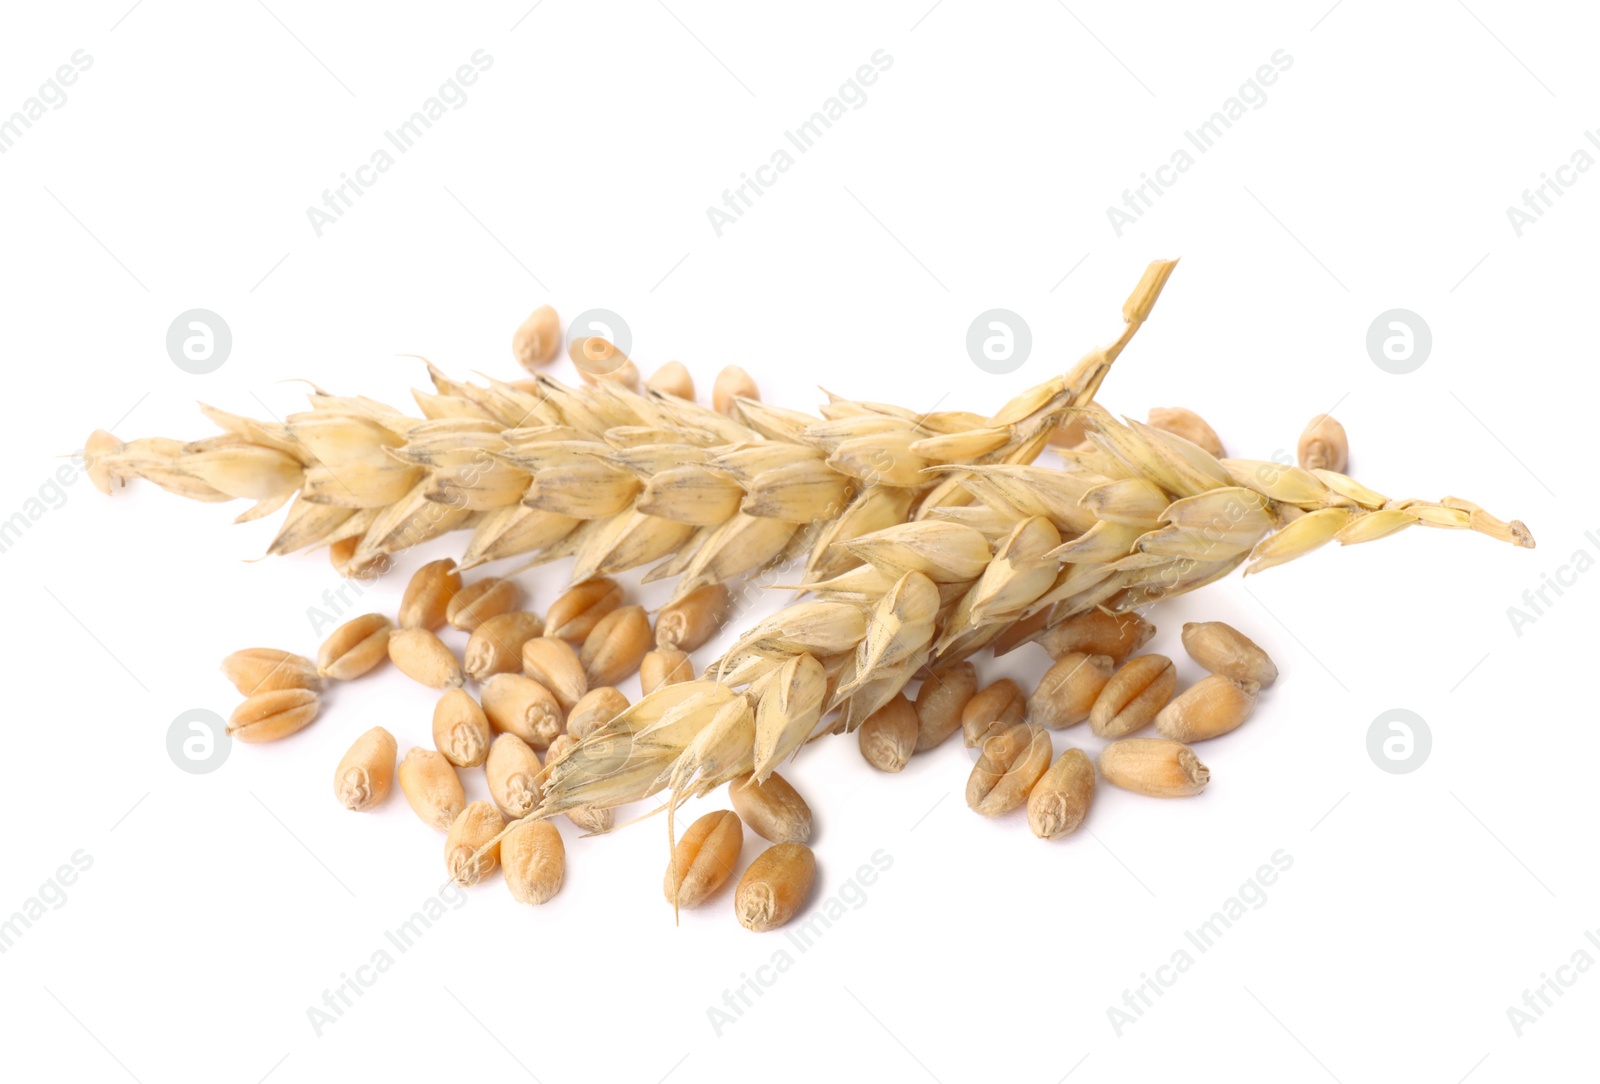 Photo of Pile of wheat grains and spikes on white background